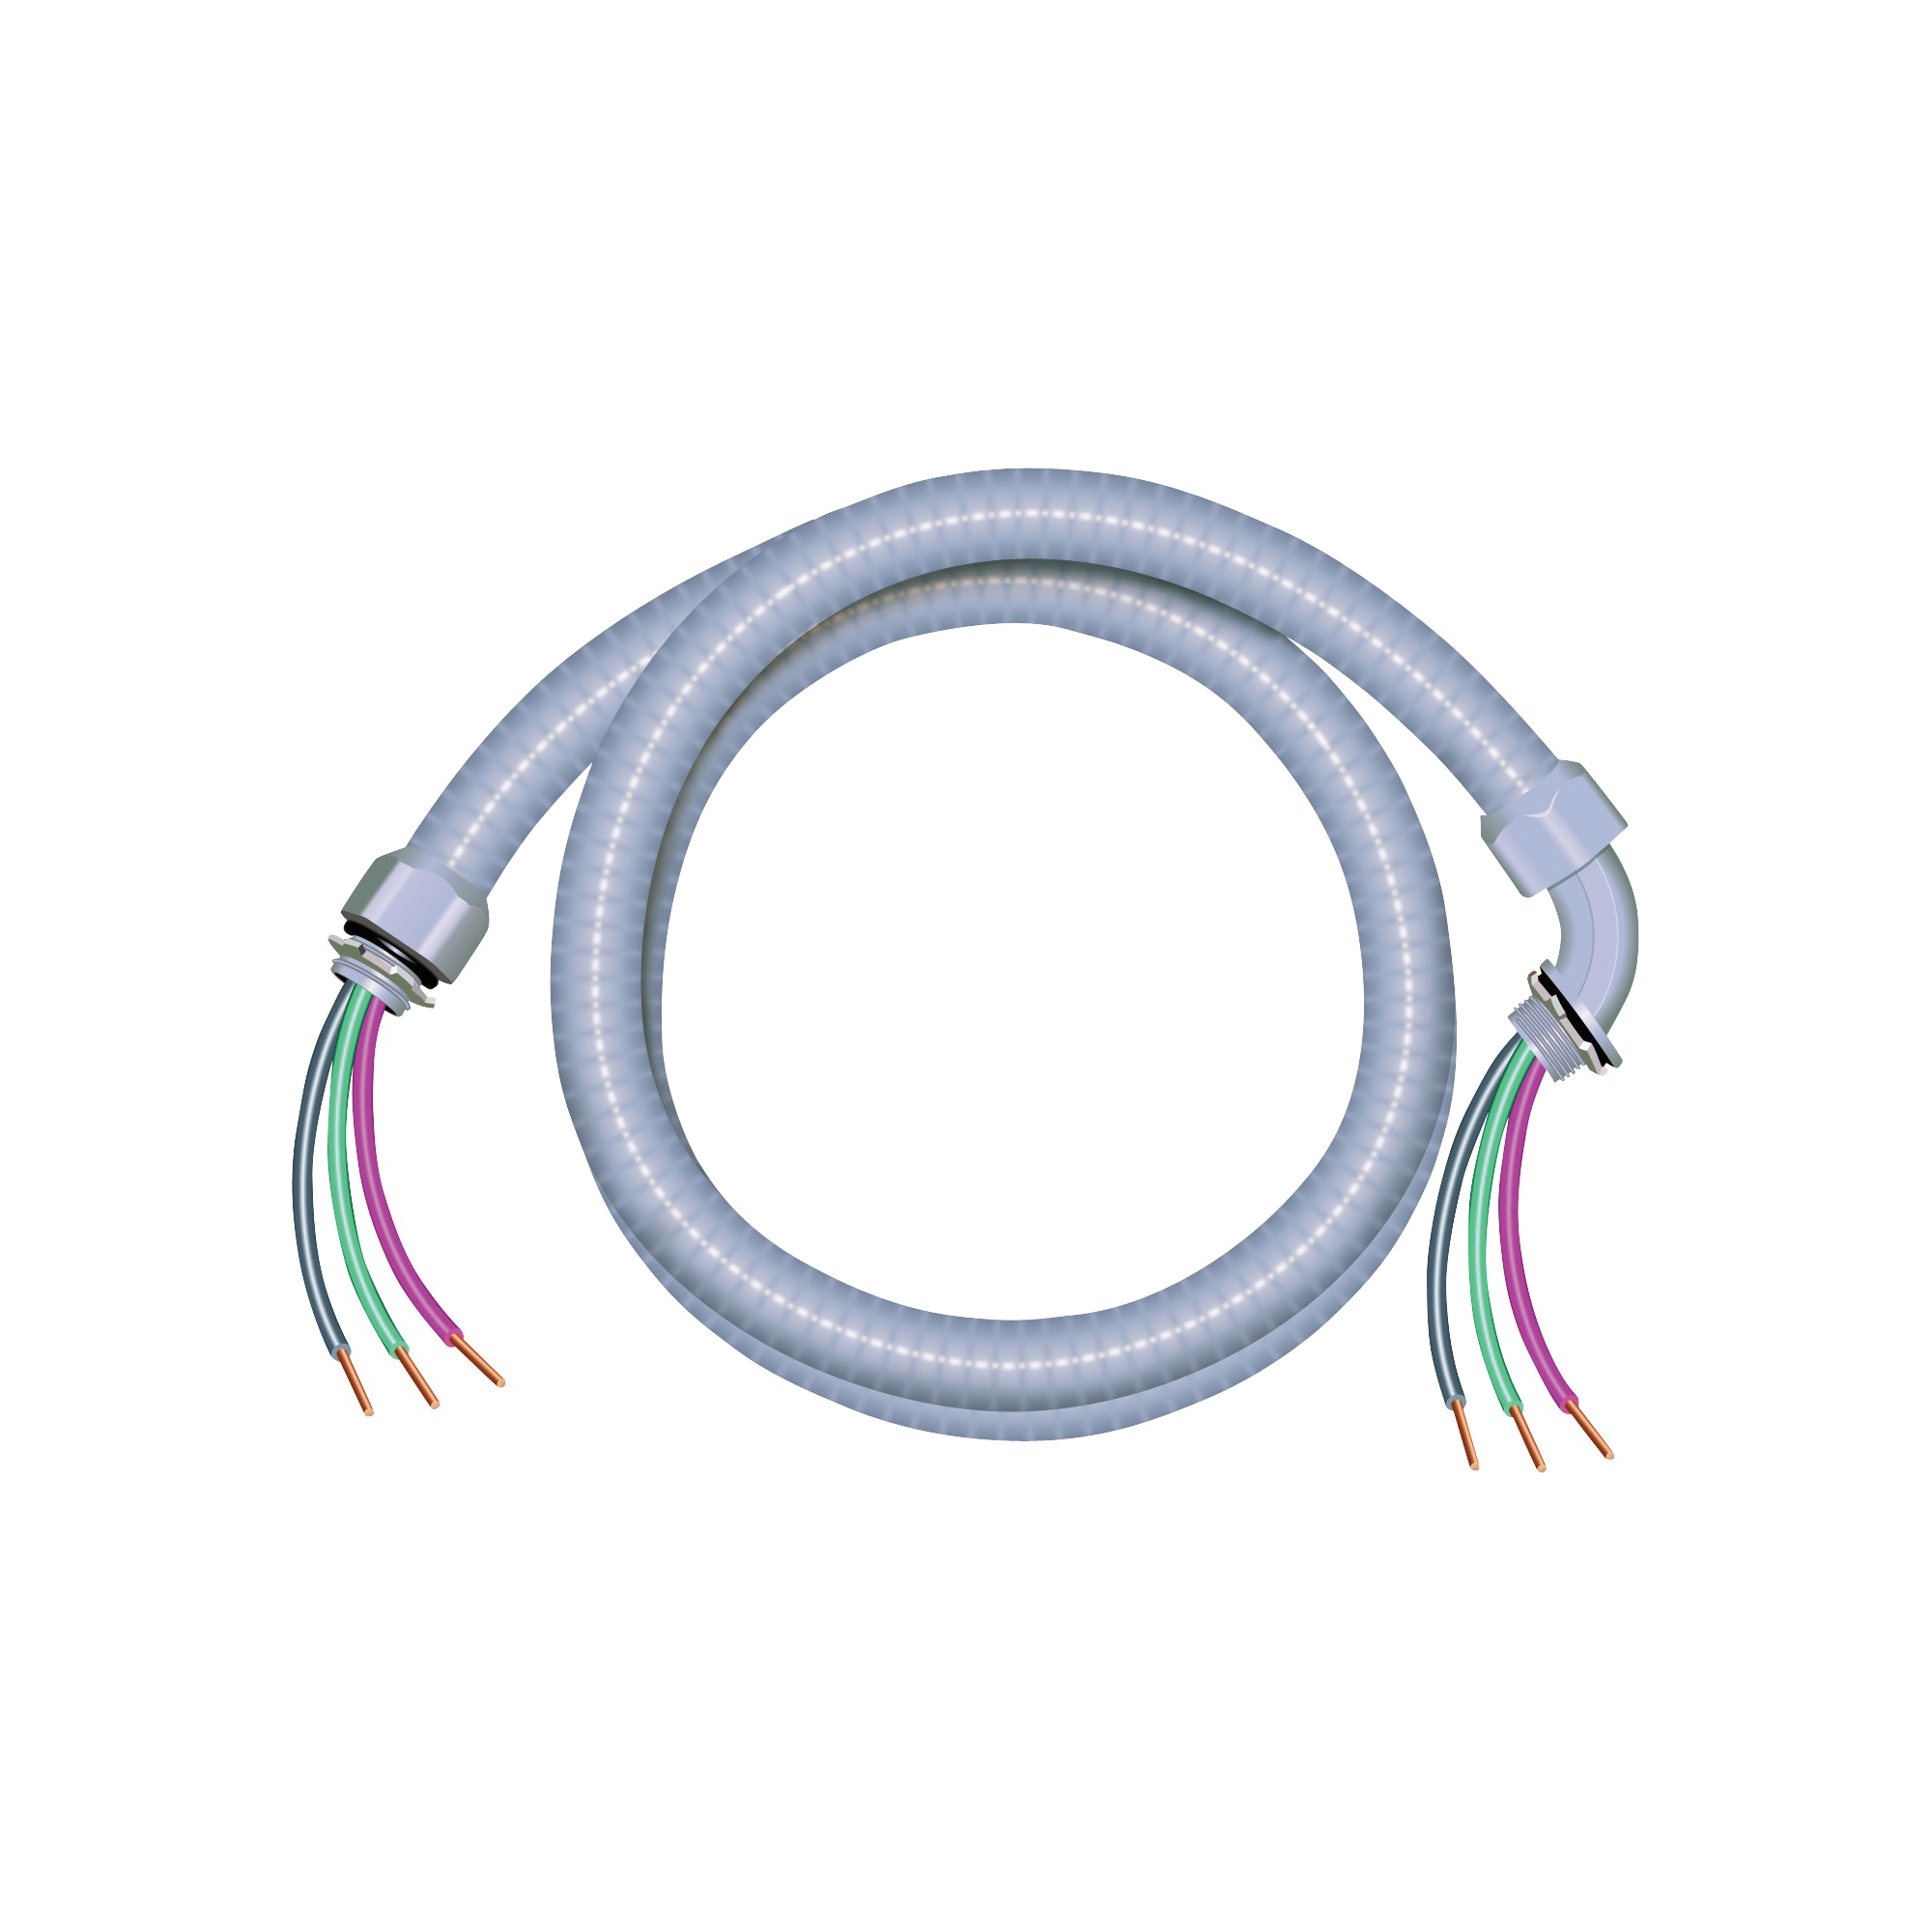 Southwire 55189407 Flexible Whip, 10 AWG Cable, Copper Conductor, THHN Insulation - 1